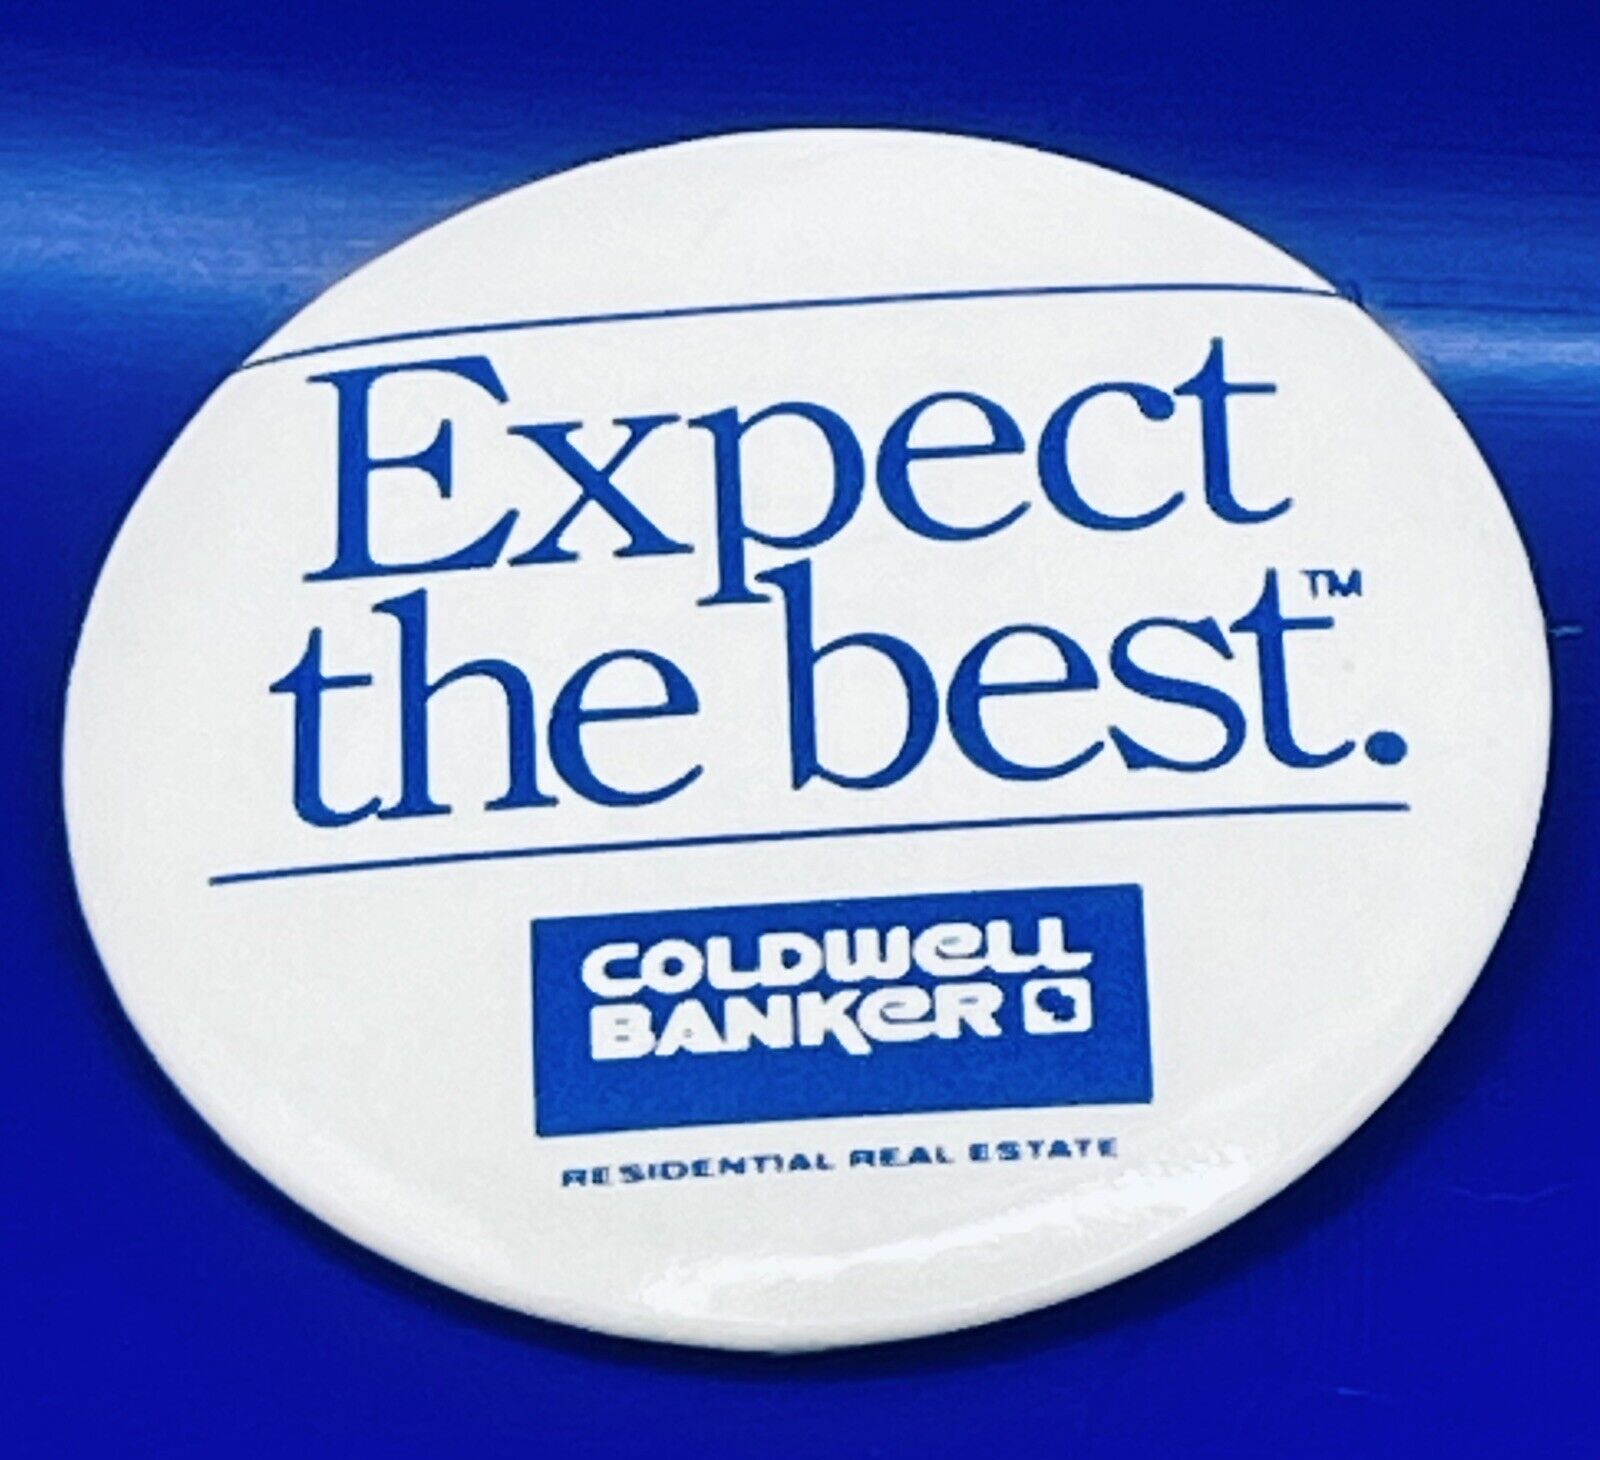 Coldwell Banker “Expect the Best.” Promitional Advertising Pin Badge Real Estate